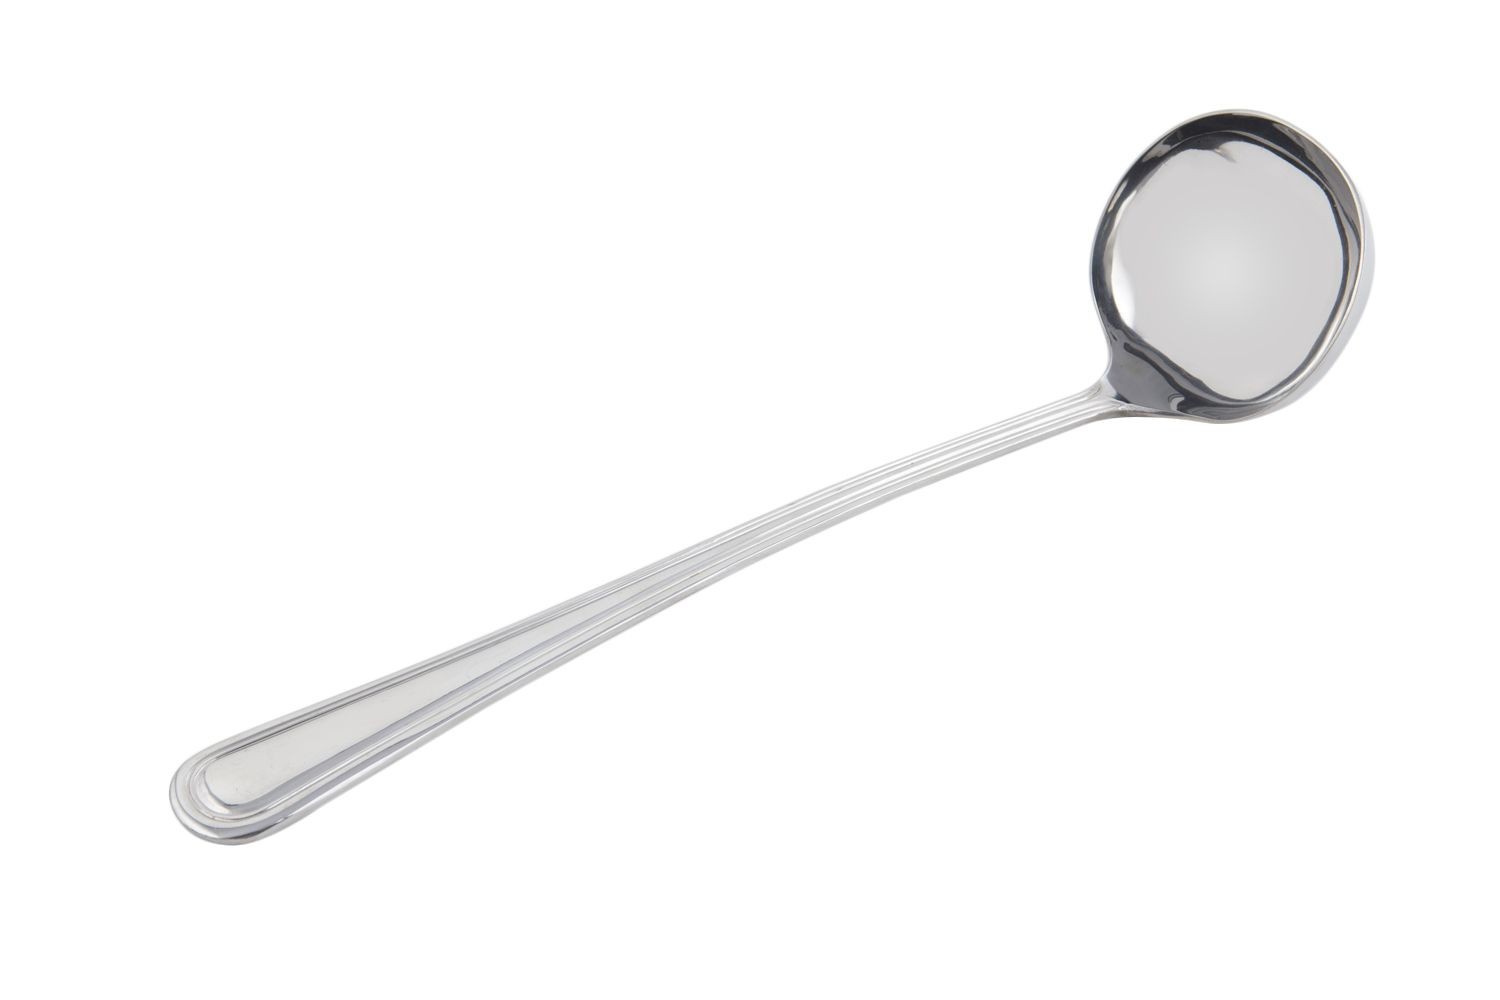 Bon Chef 9406SS Stainless Steel Salad Dressing Ladle, 11 1/2"